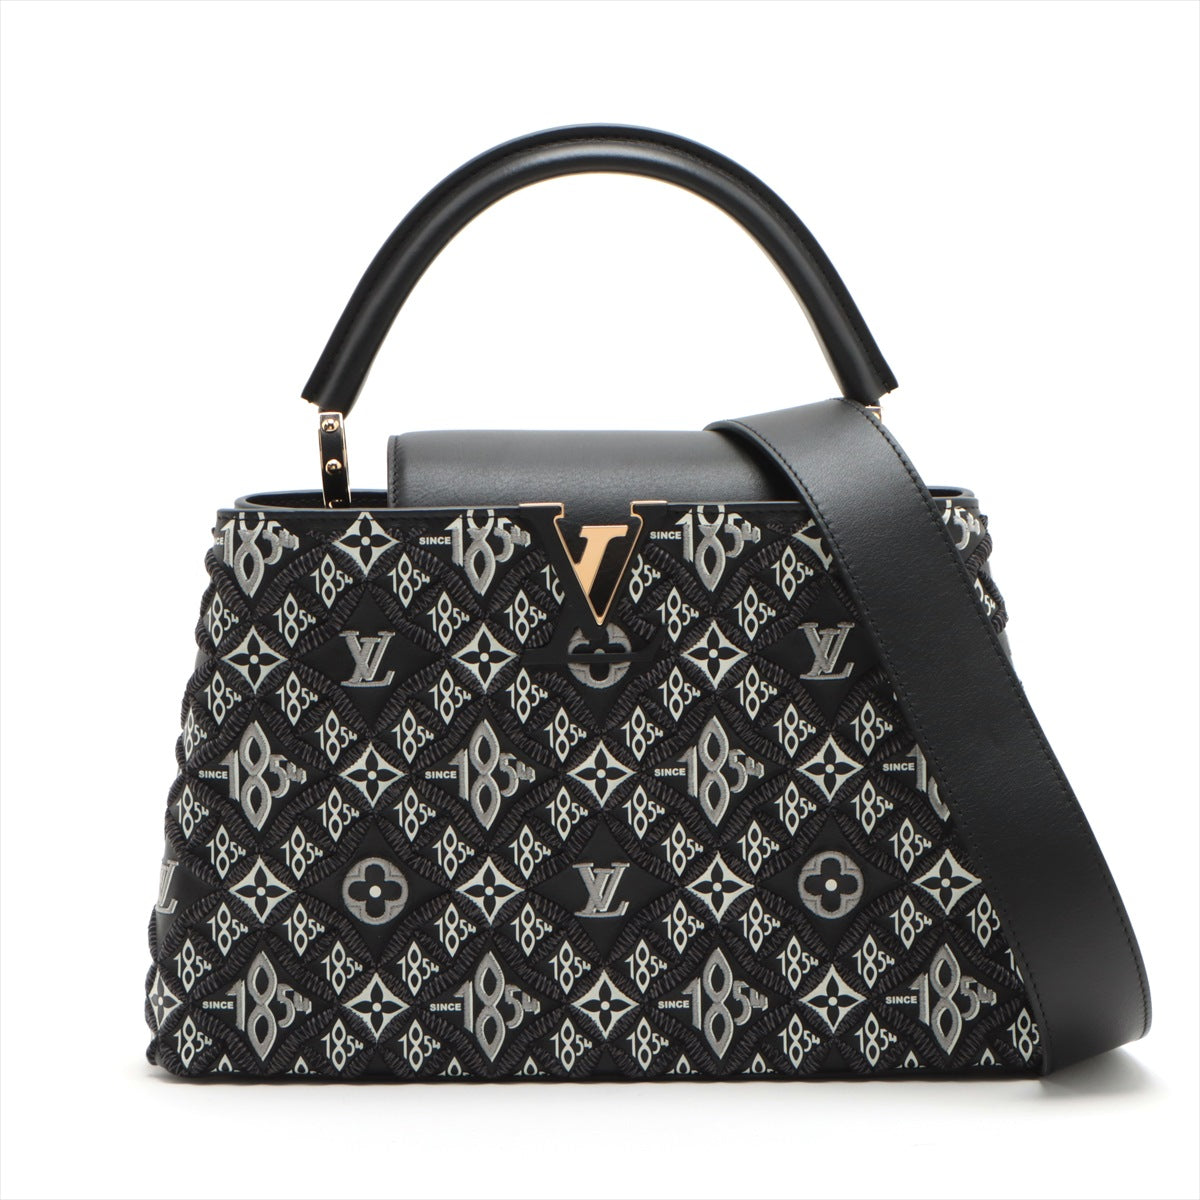 Louis Vuitton Since1854 Capucines PM M57358 There was an RFID response